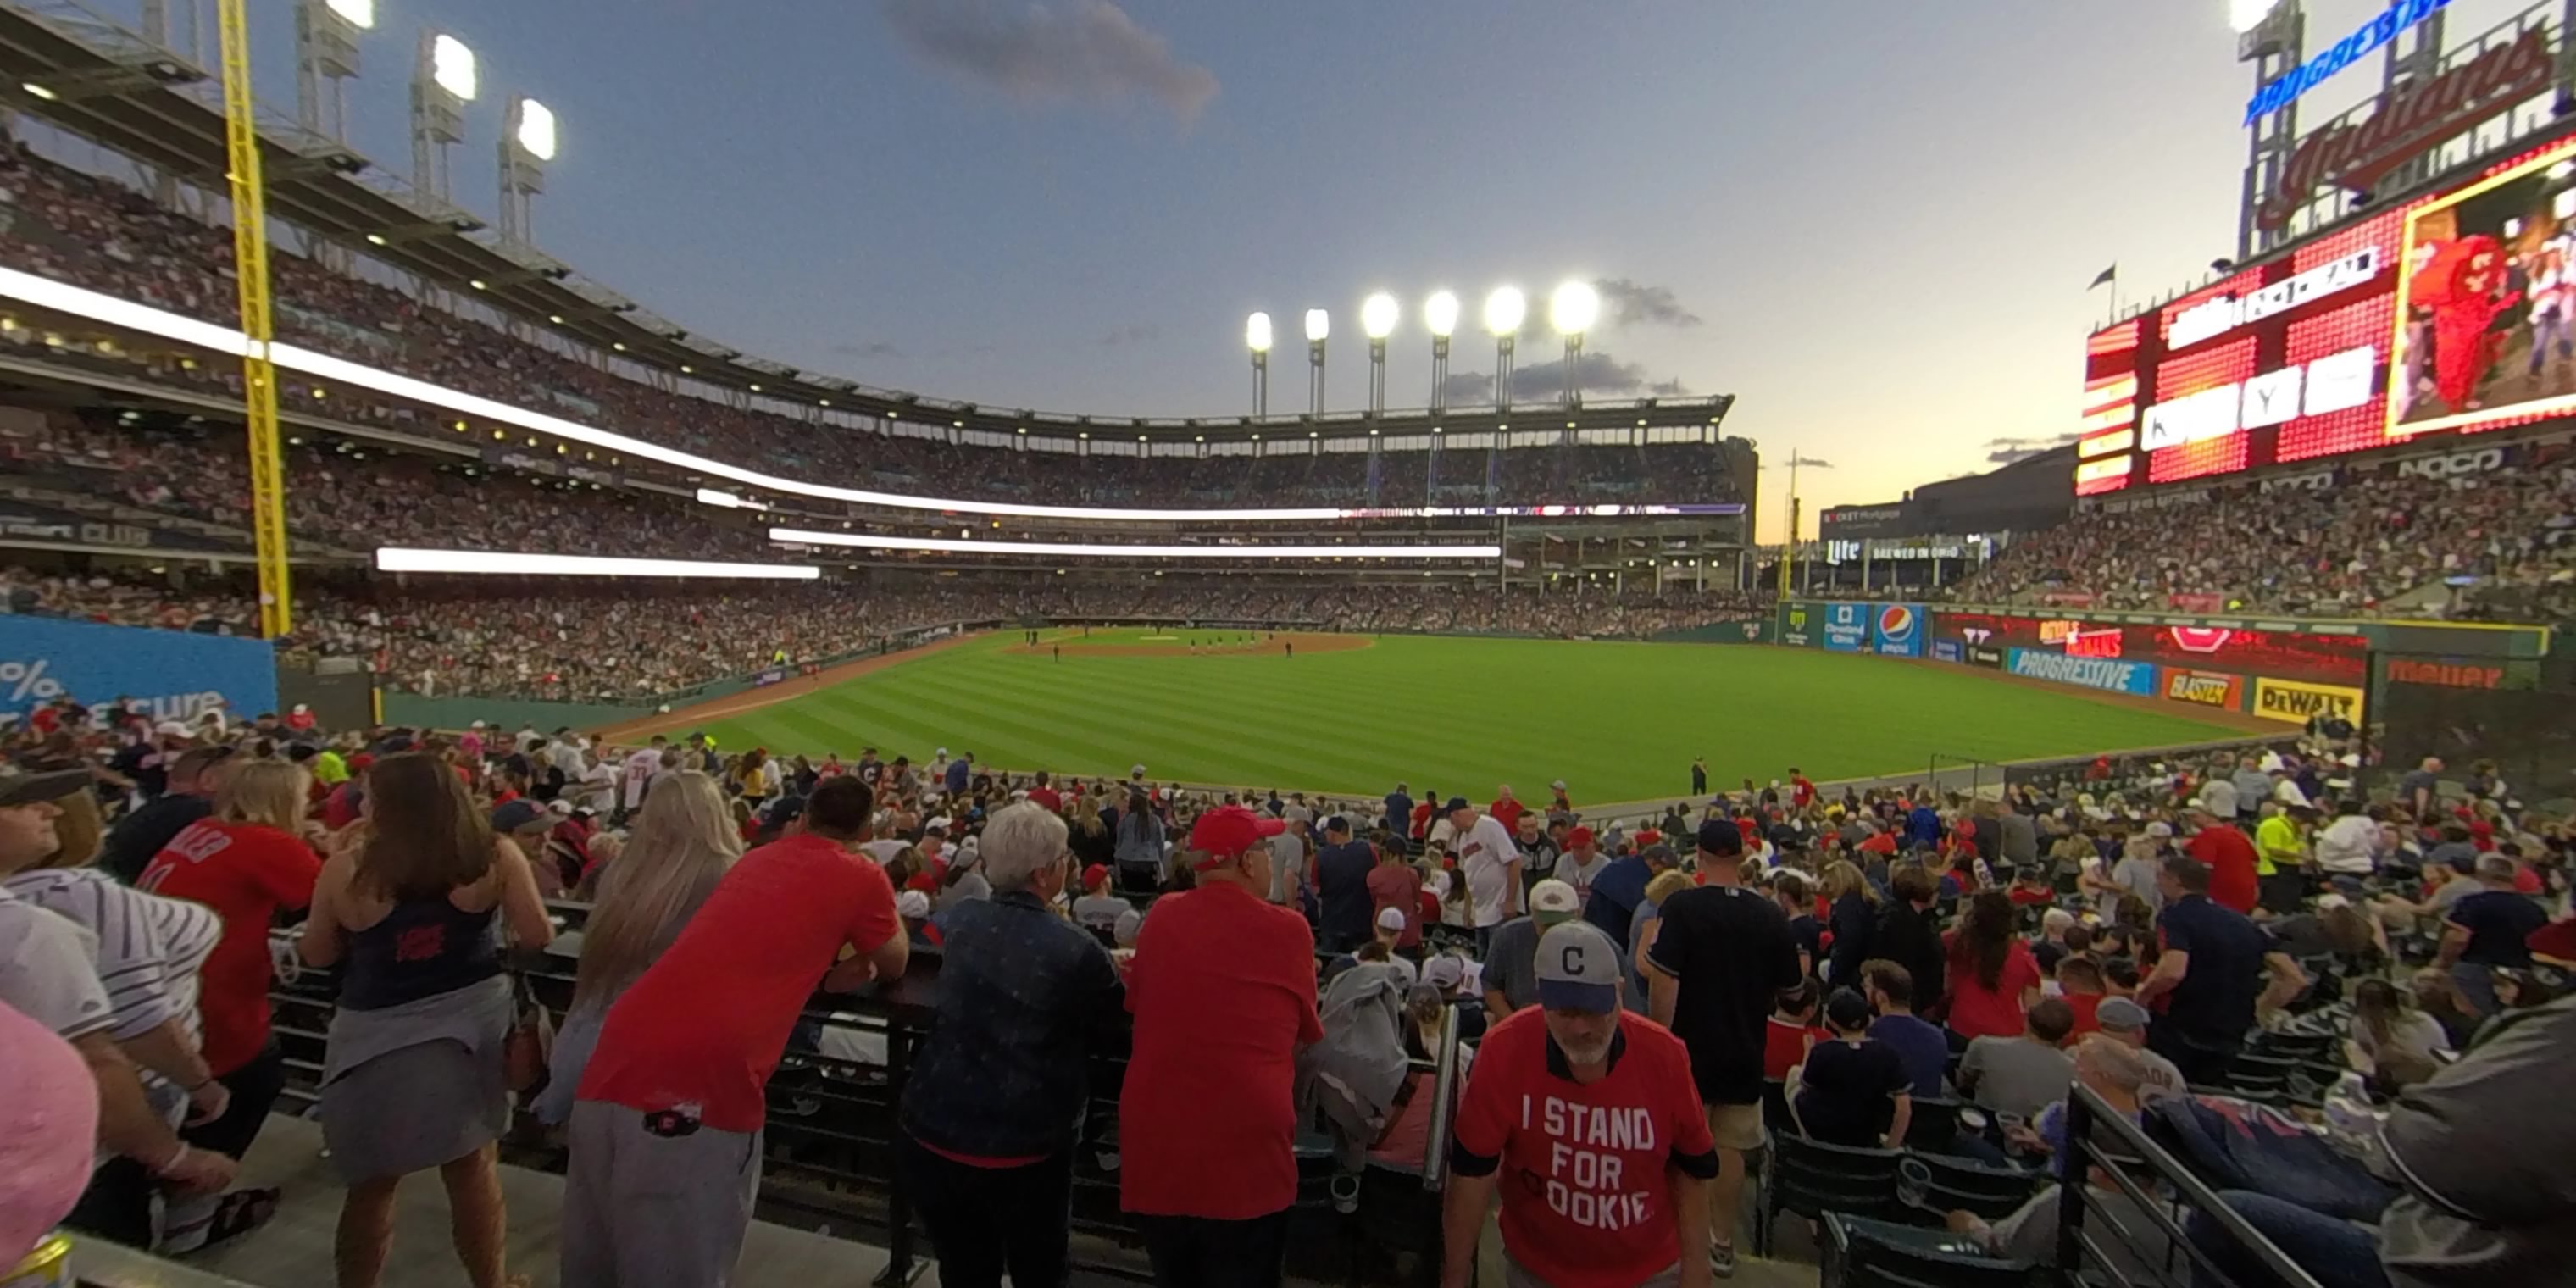 section 108 panoramic seat view  - progressive field